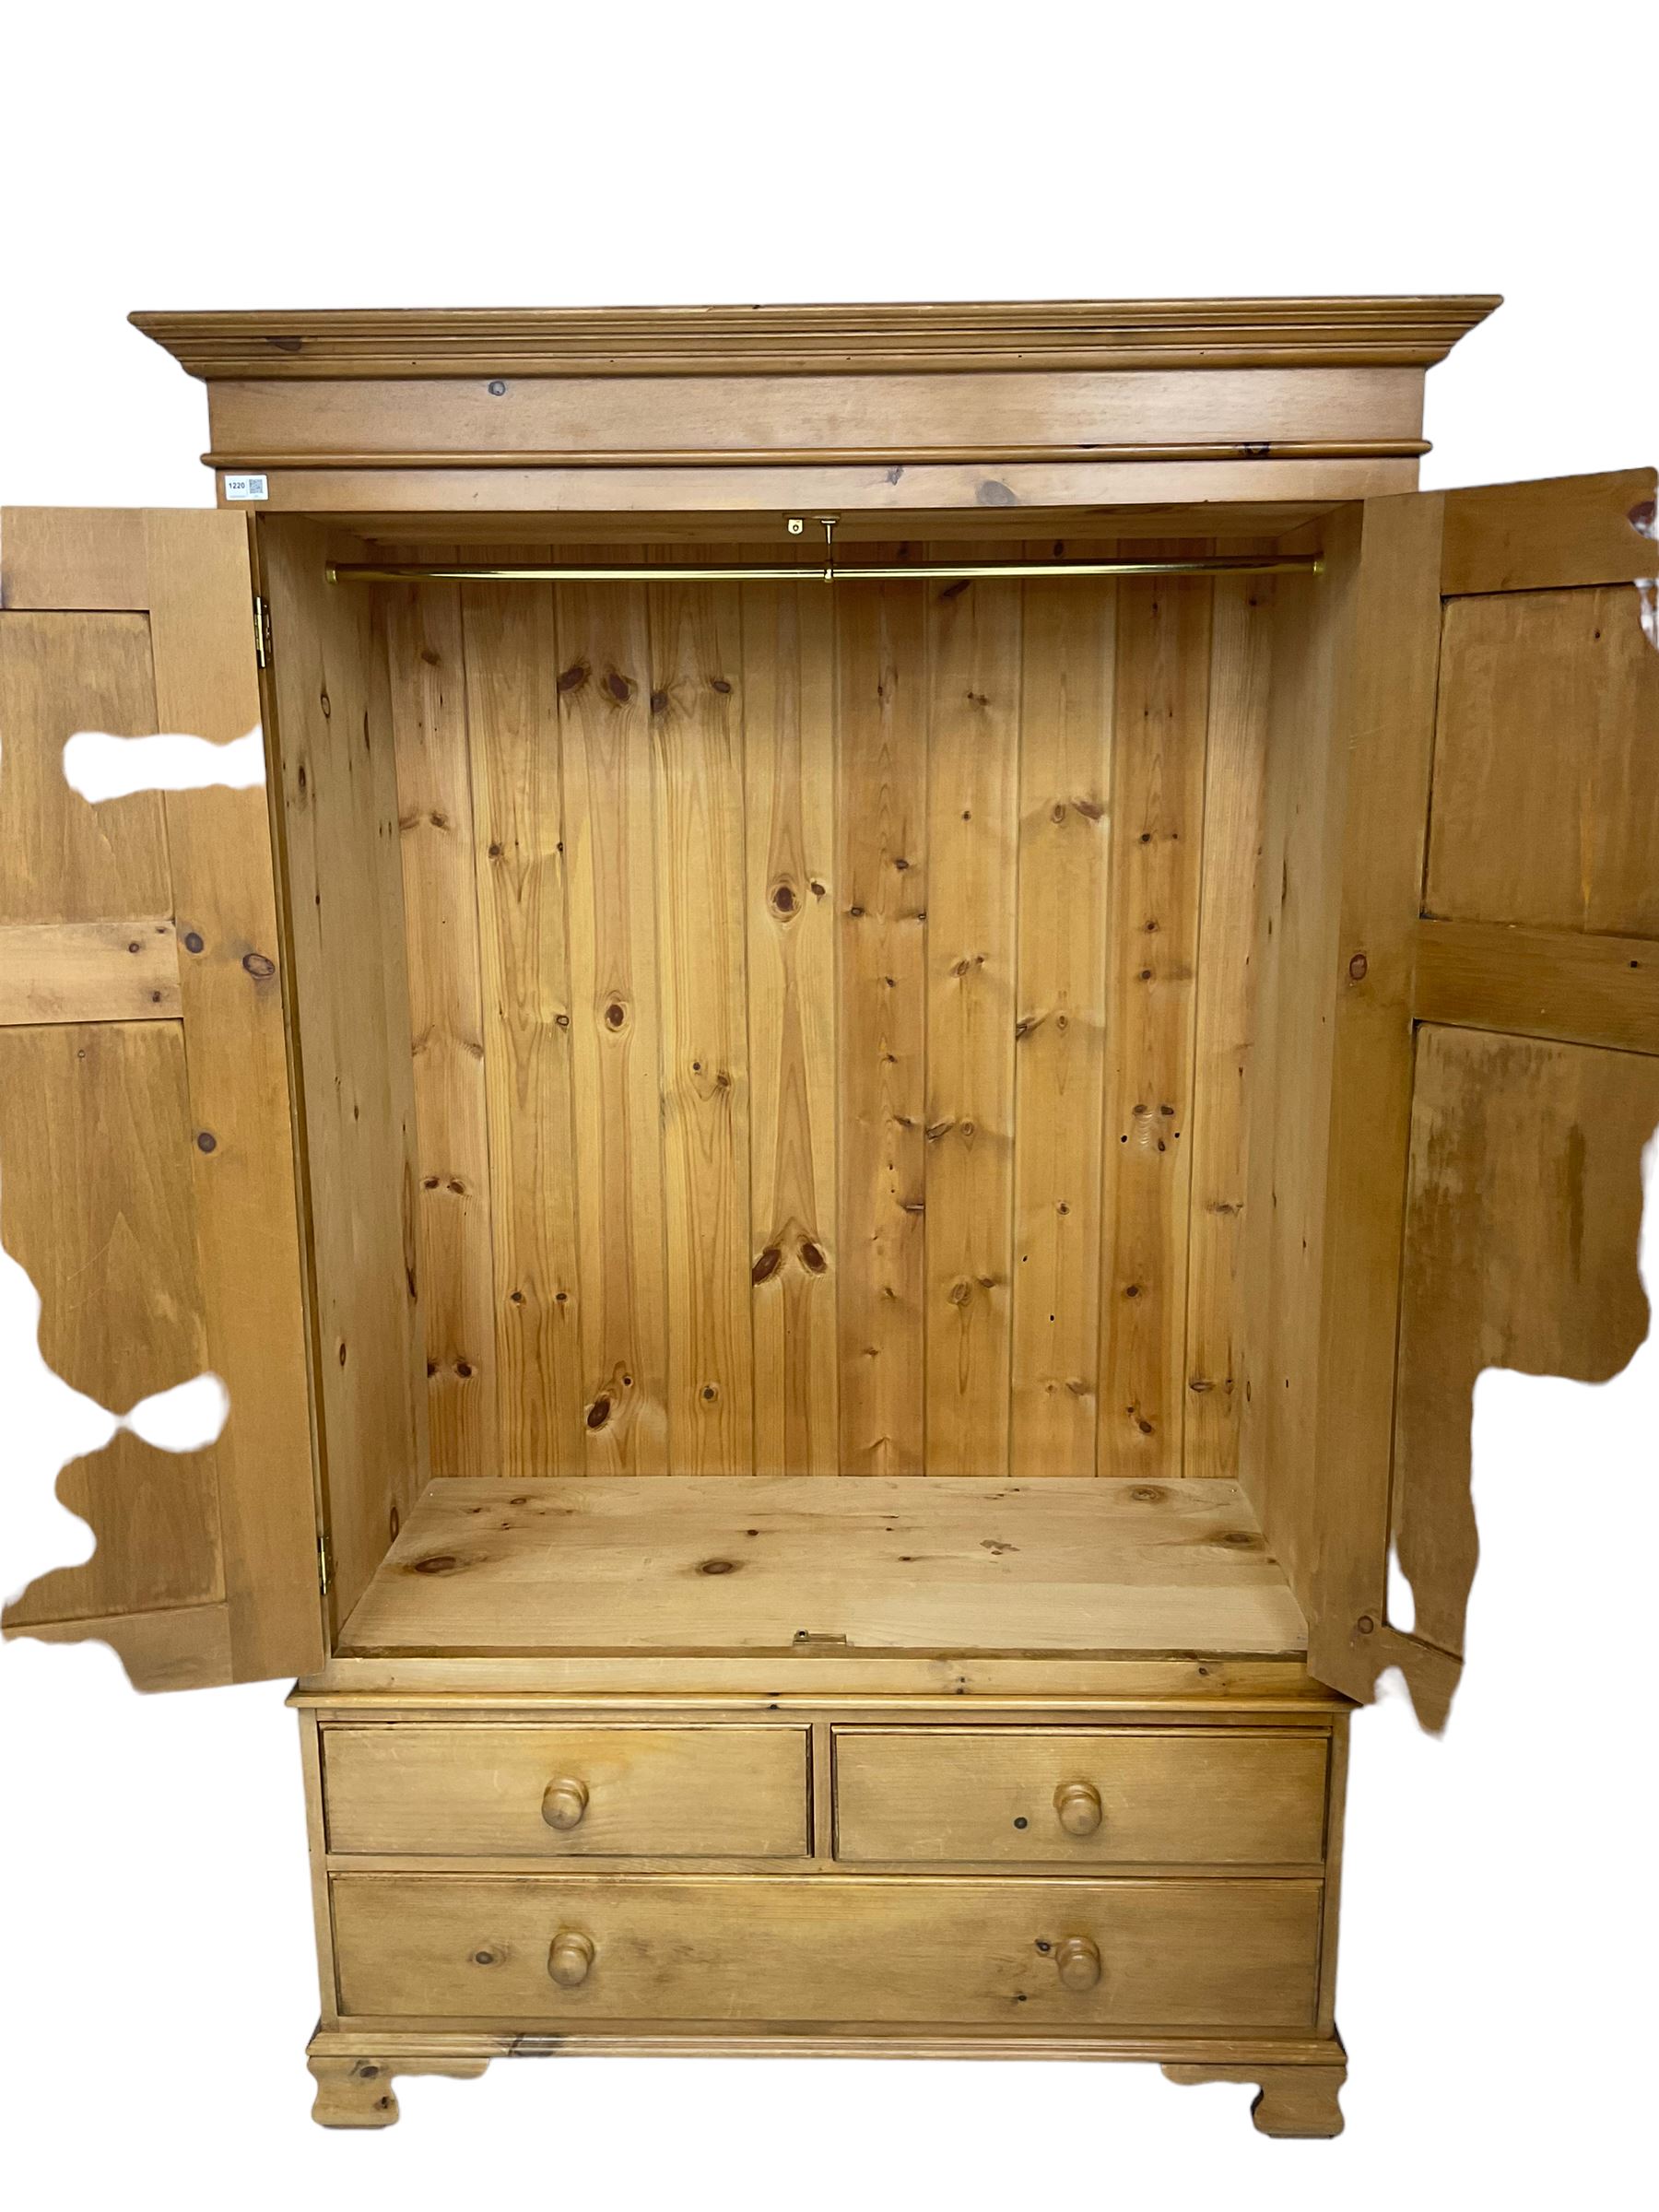 Traditional pine double wardrobe - Image 5 of 5